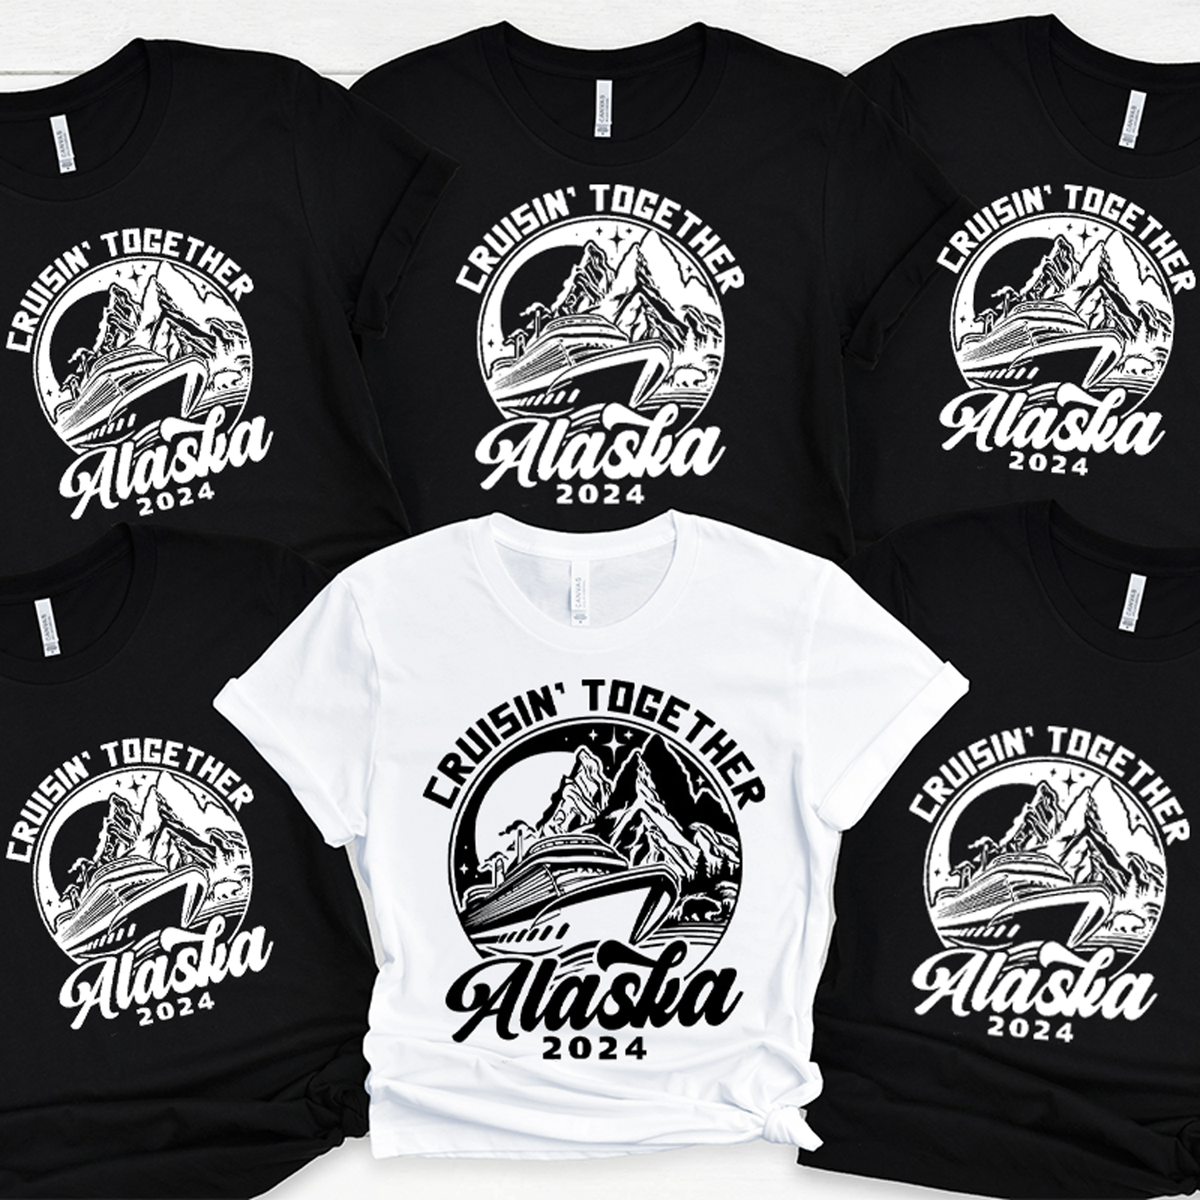 a group of black and white t - shirts with the words alaska printed on them